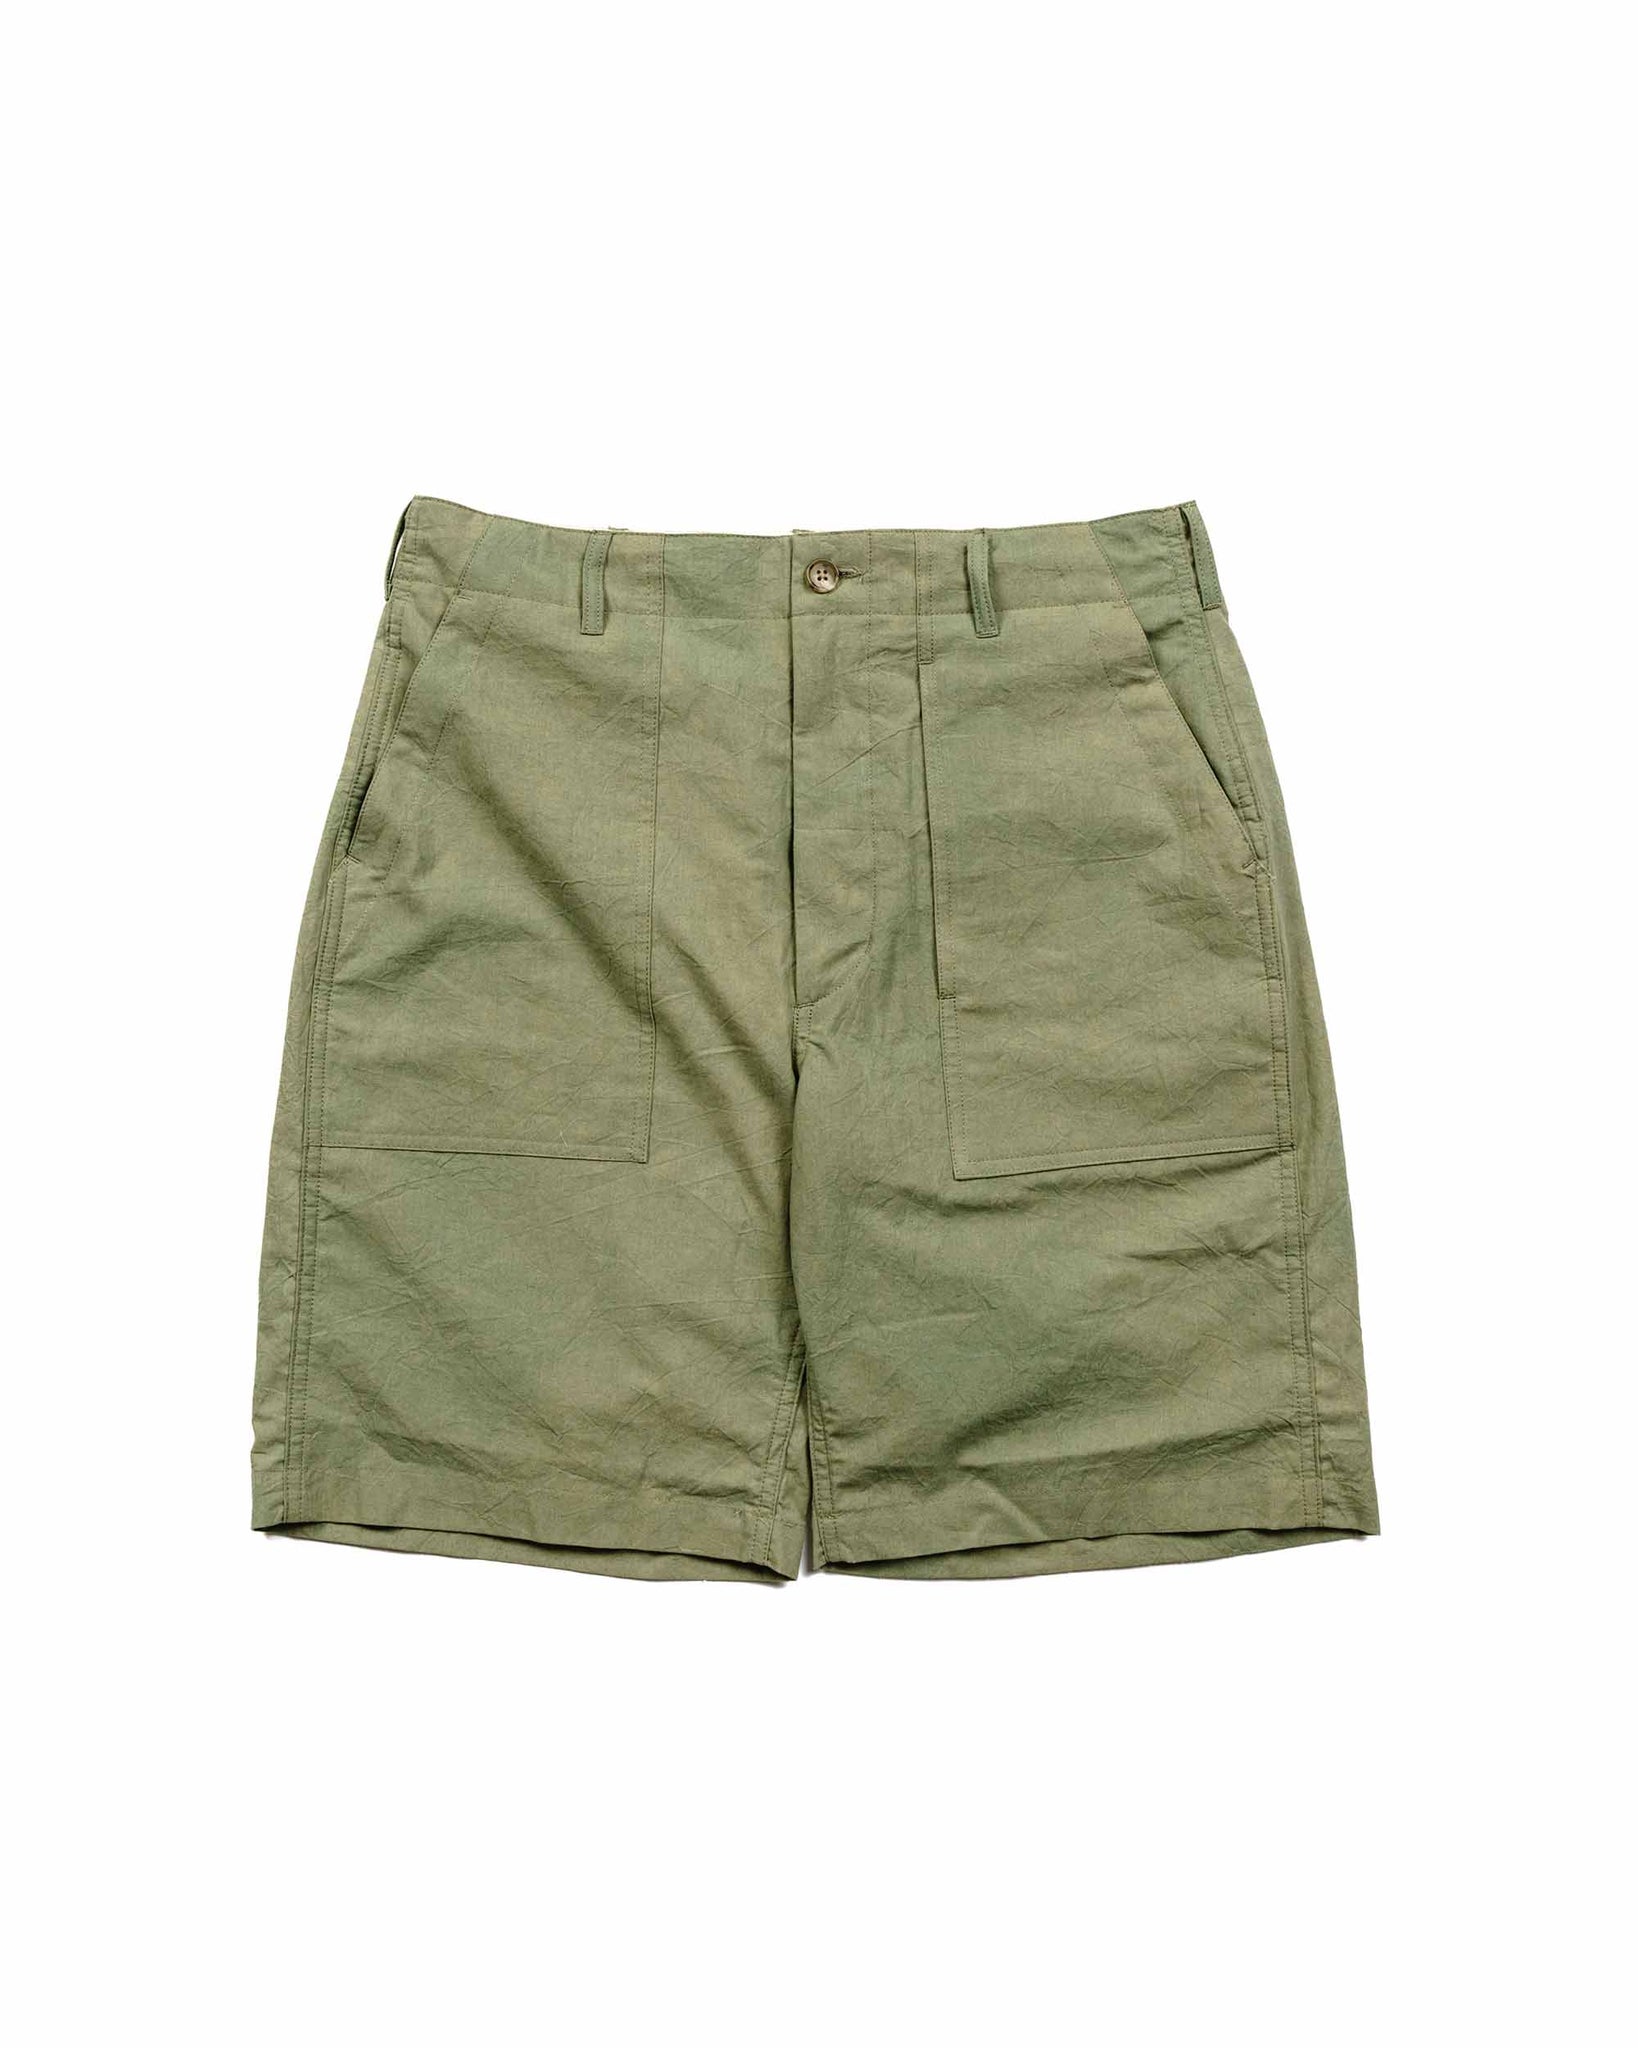 Engineered Garments Fatigue Short Olive Cotton Sheeting